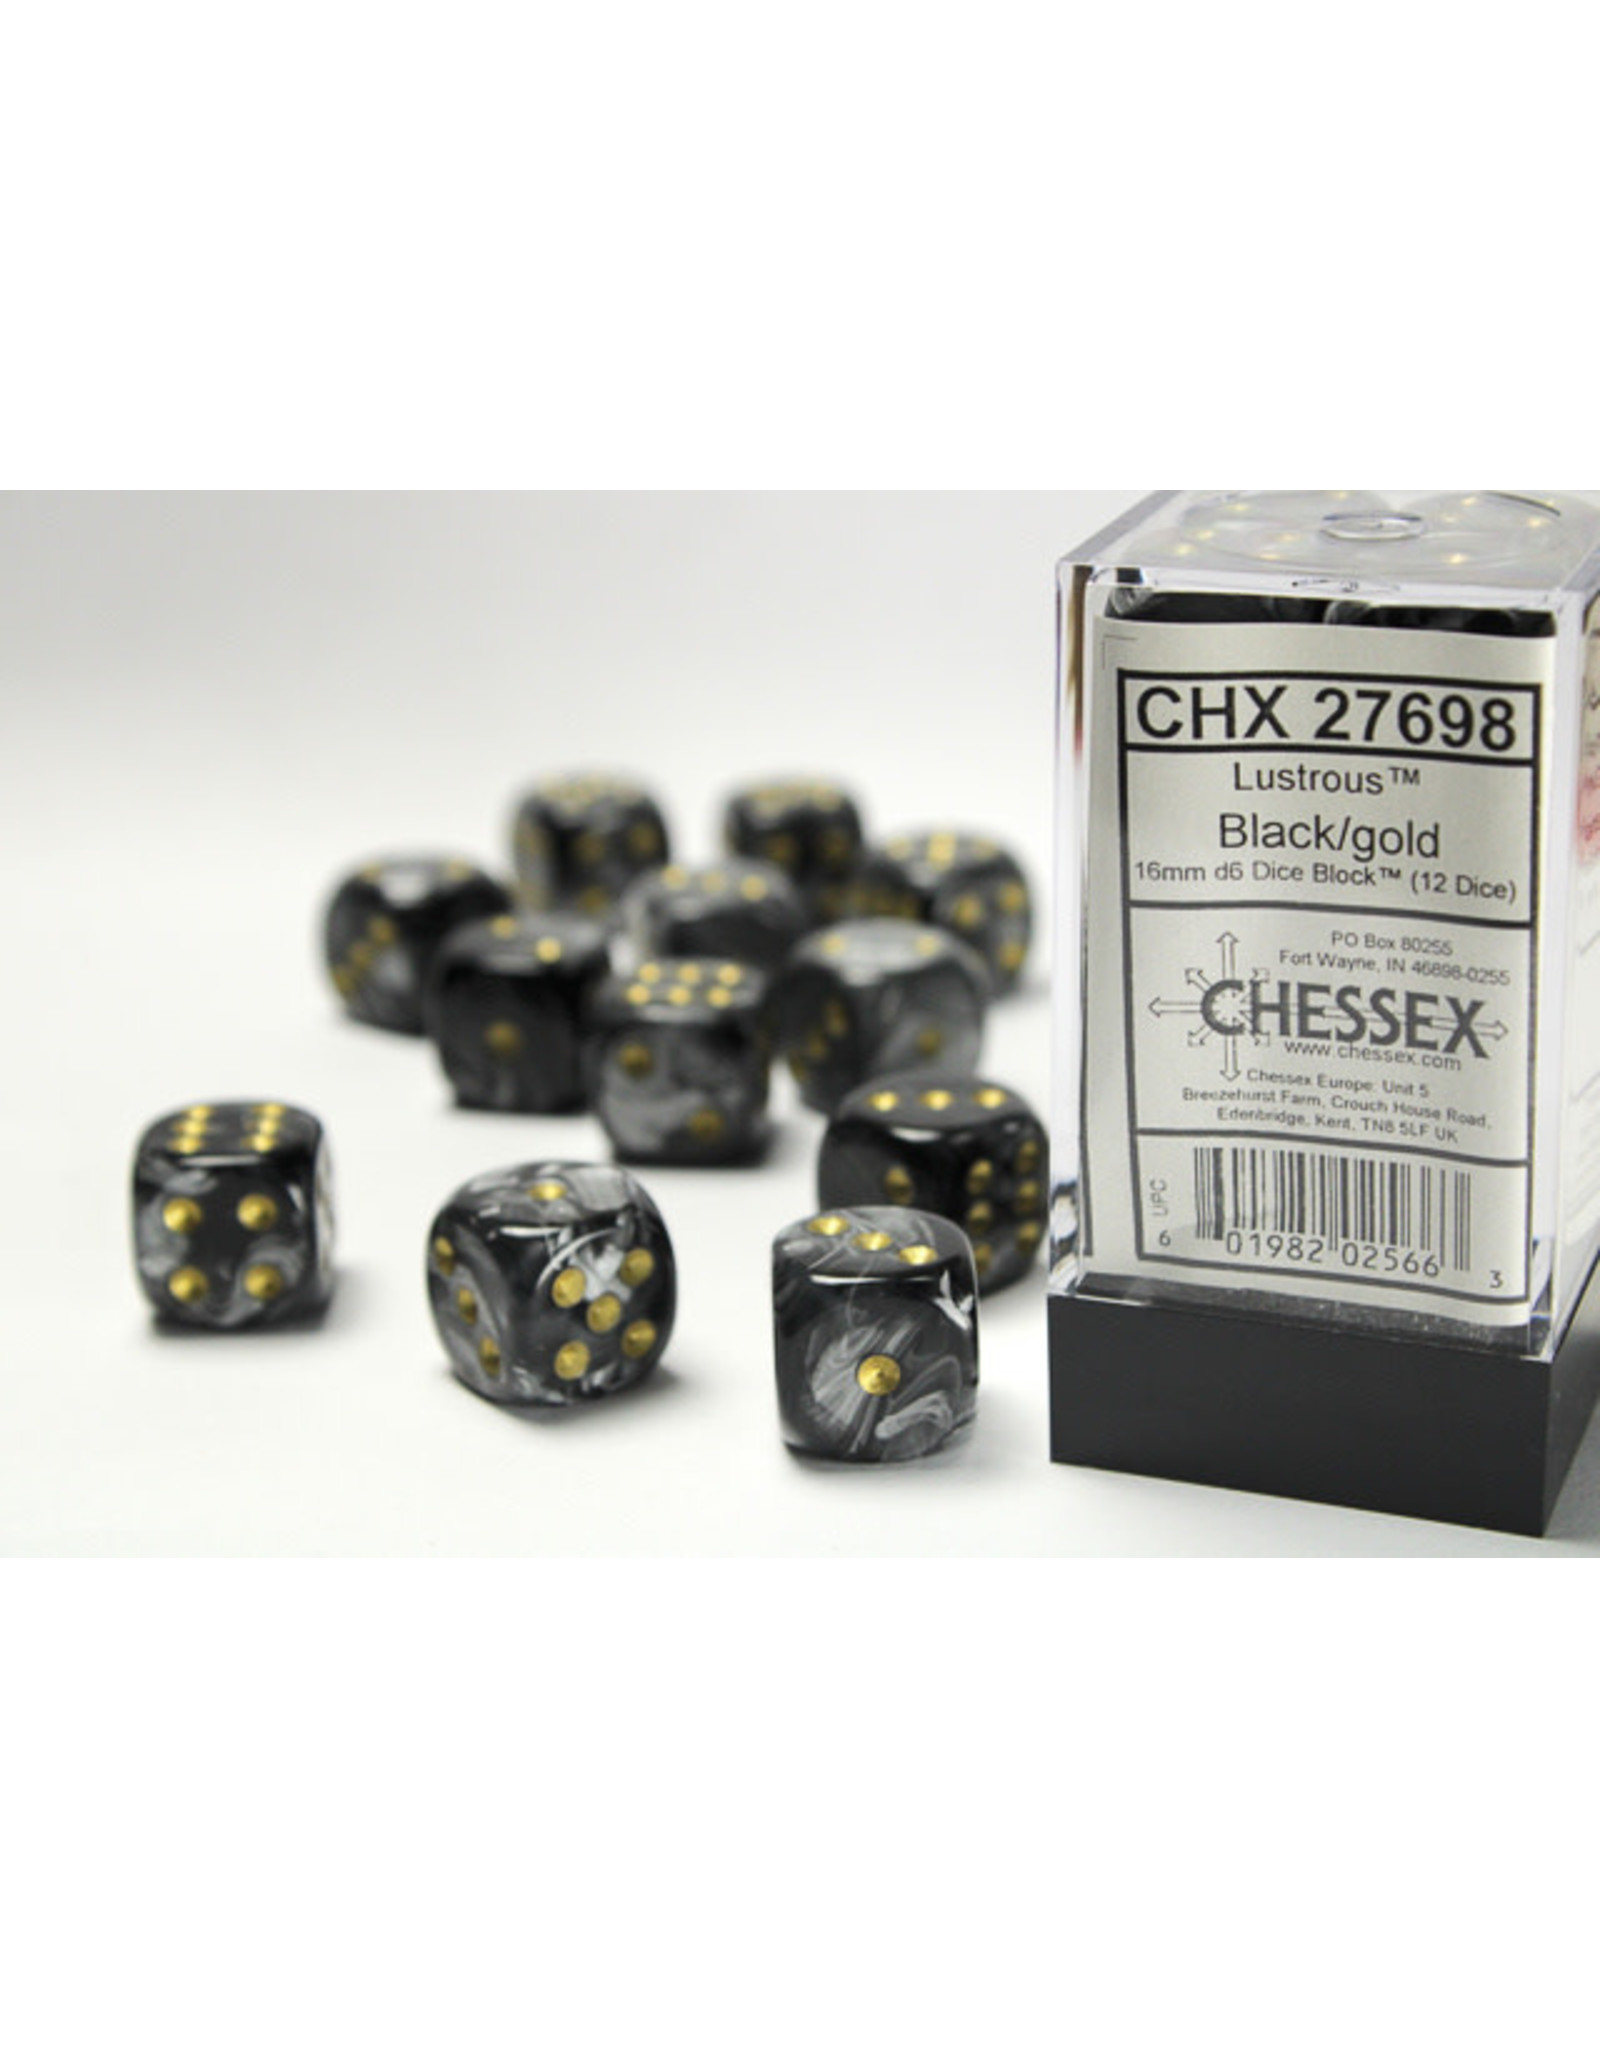 Chessex Chessex Lustrous 16mm (12d6)